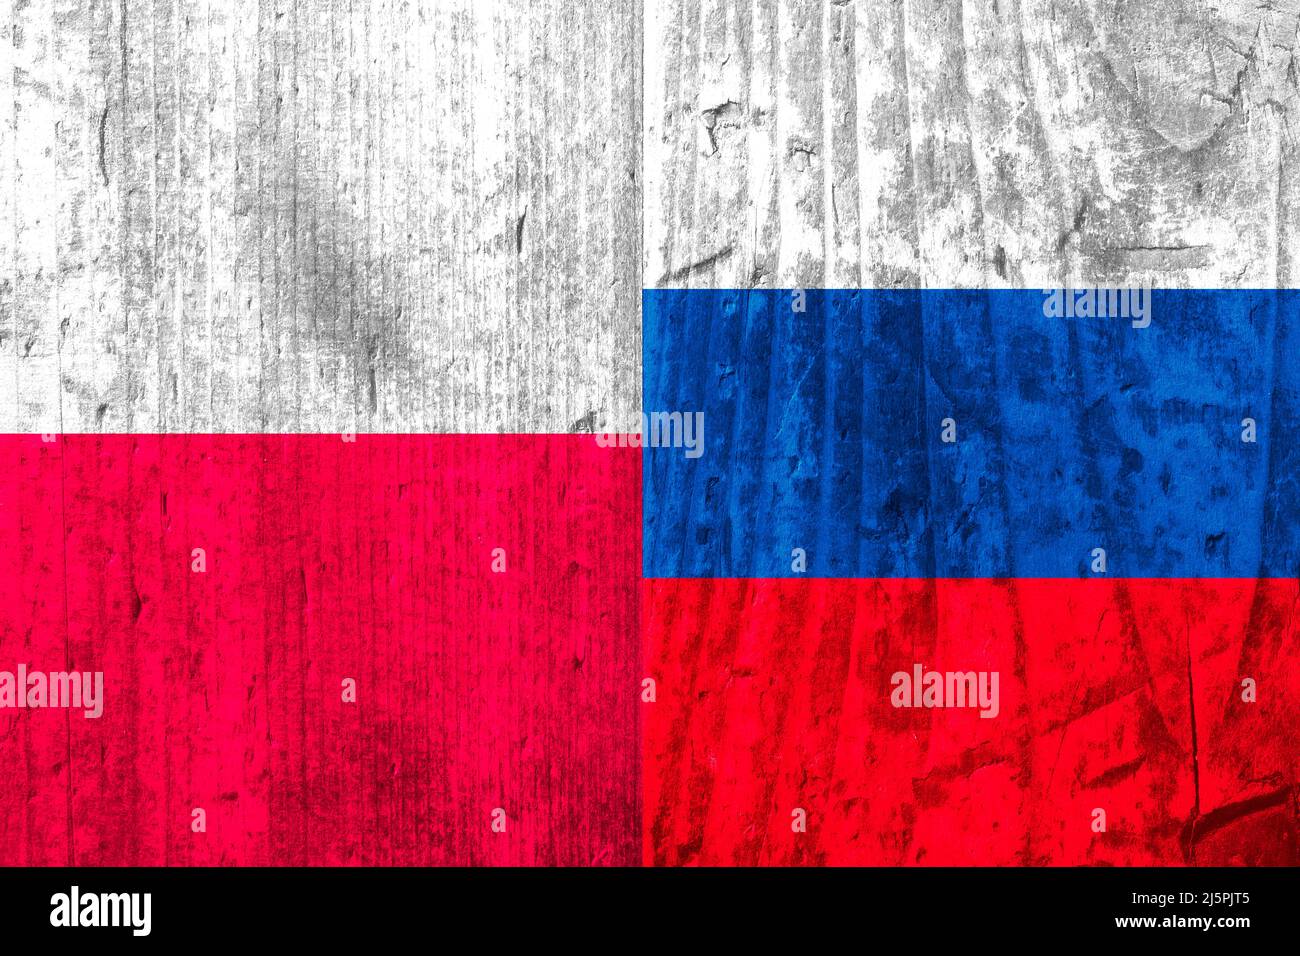 Flags of Poland and Russia on a wooden surface. Stock Photo